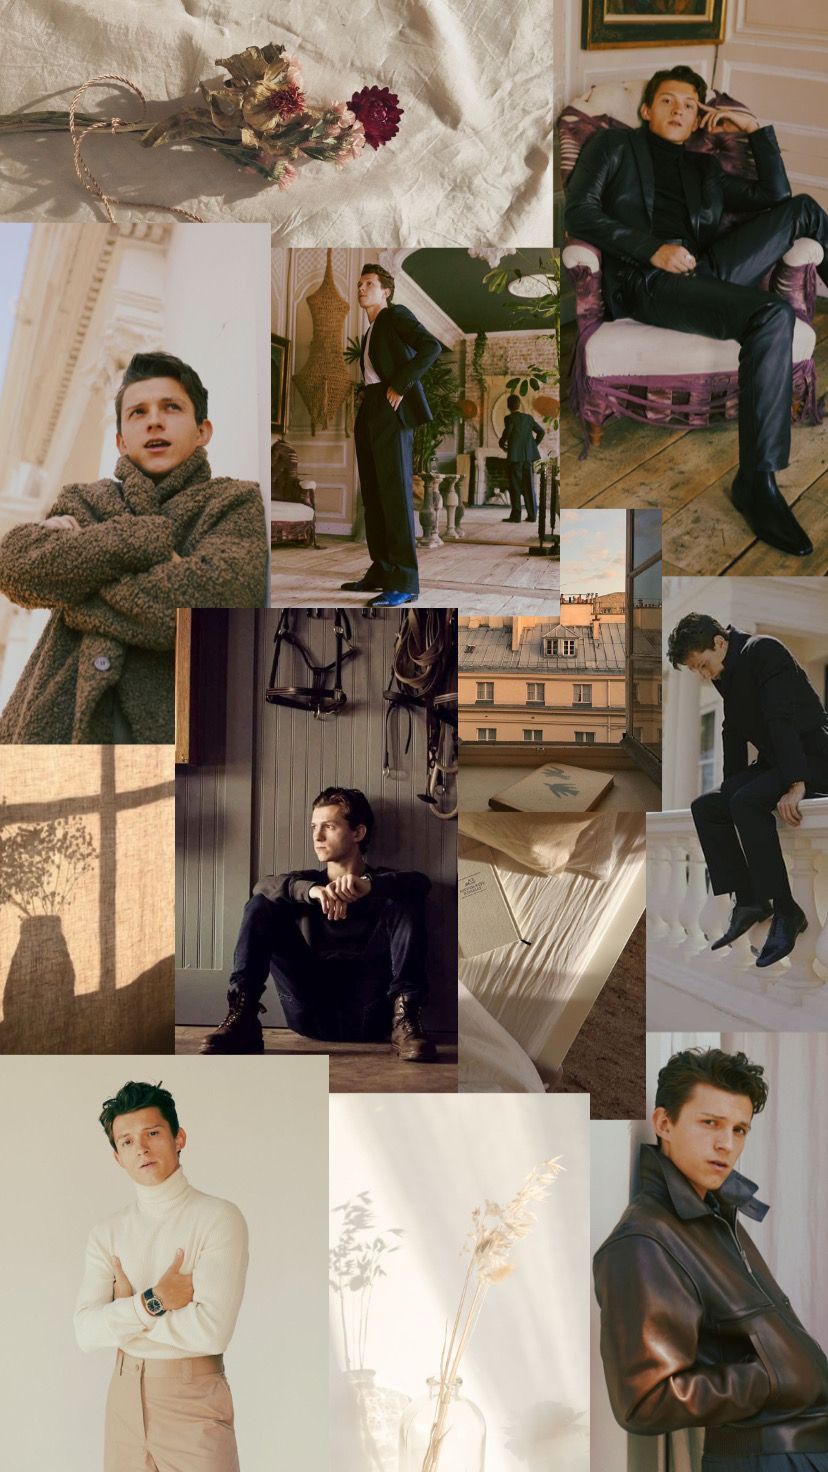 Tom Holland, actor, collage, photography, men's fashion, actor, actor, collage, photography, men's fashion - Tom Holland